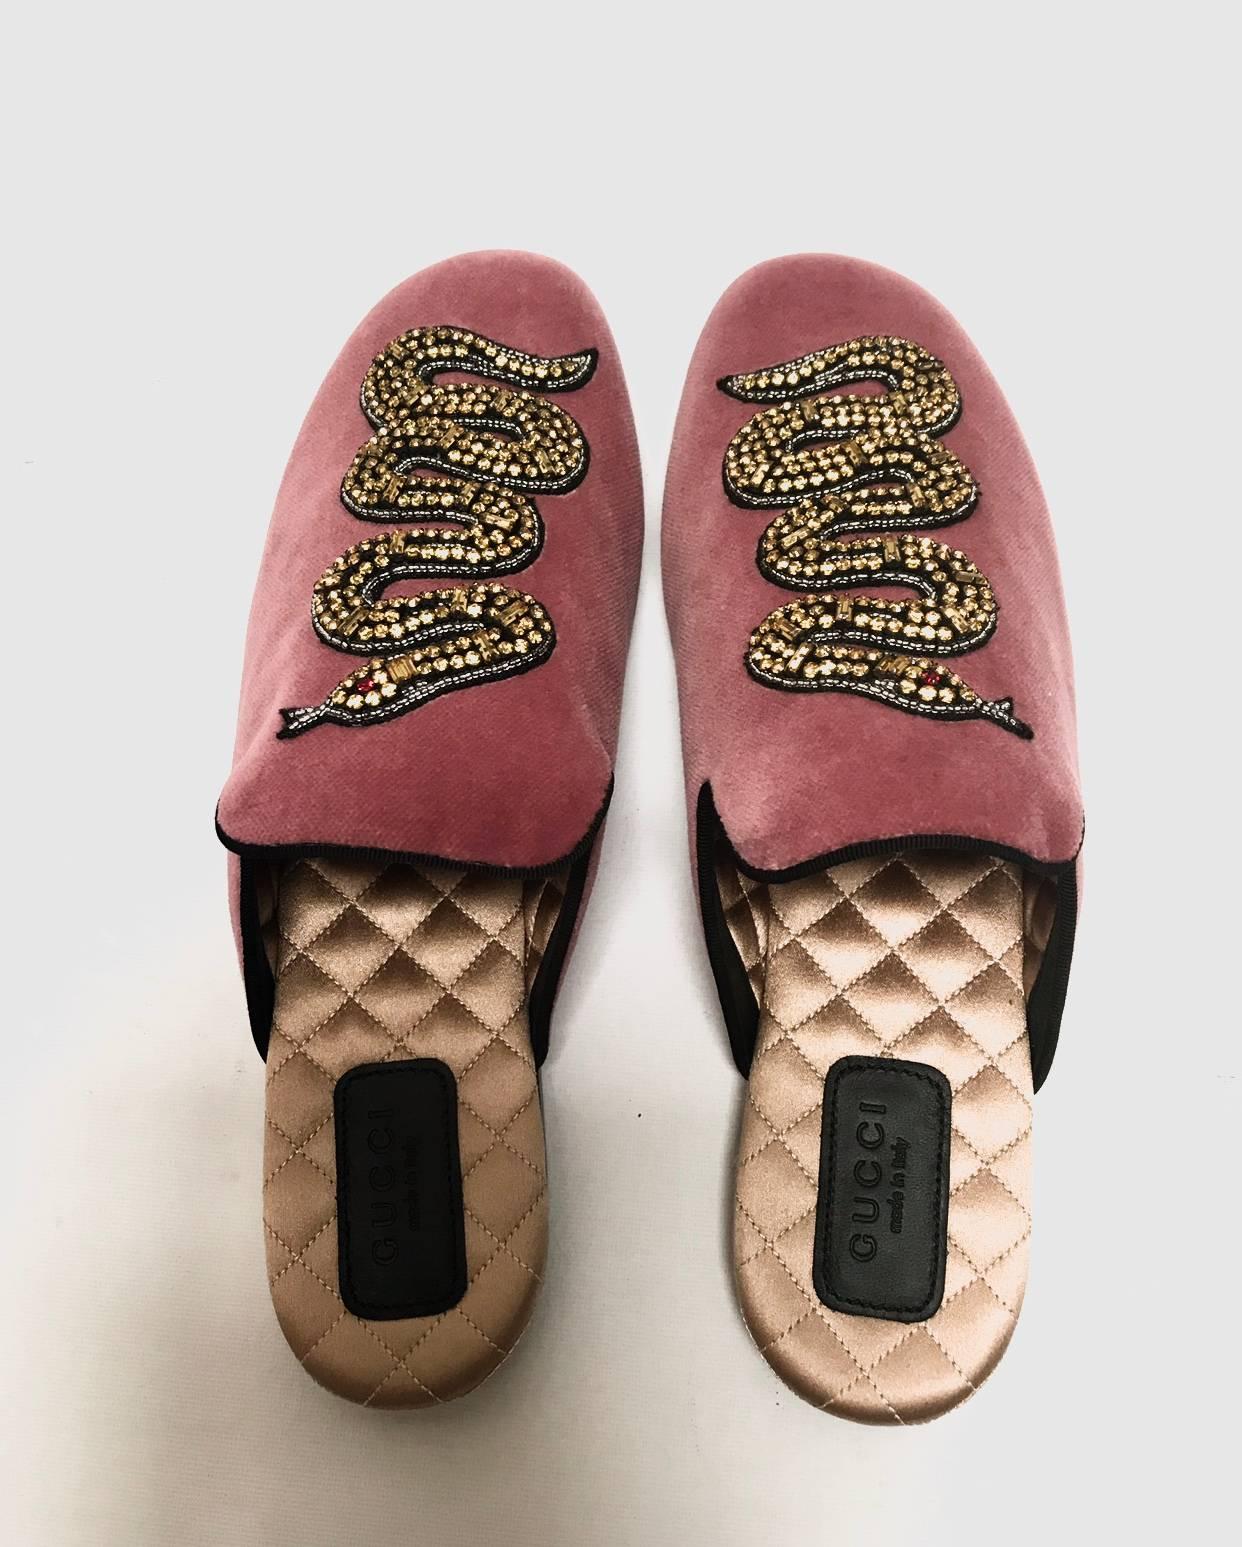 GUCCI 
Season Fw17

Women's evening velvet slipper embellished with a snake application with beads and crystals. In pink velvet with black grosgrain profile, snake appliqué embroidered with yellow crystals, quilted satin lining. Made in Italy. This